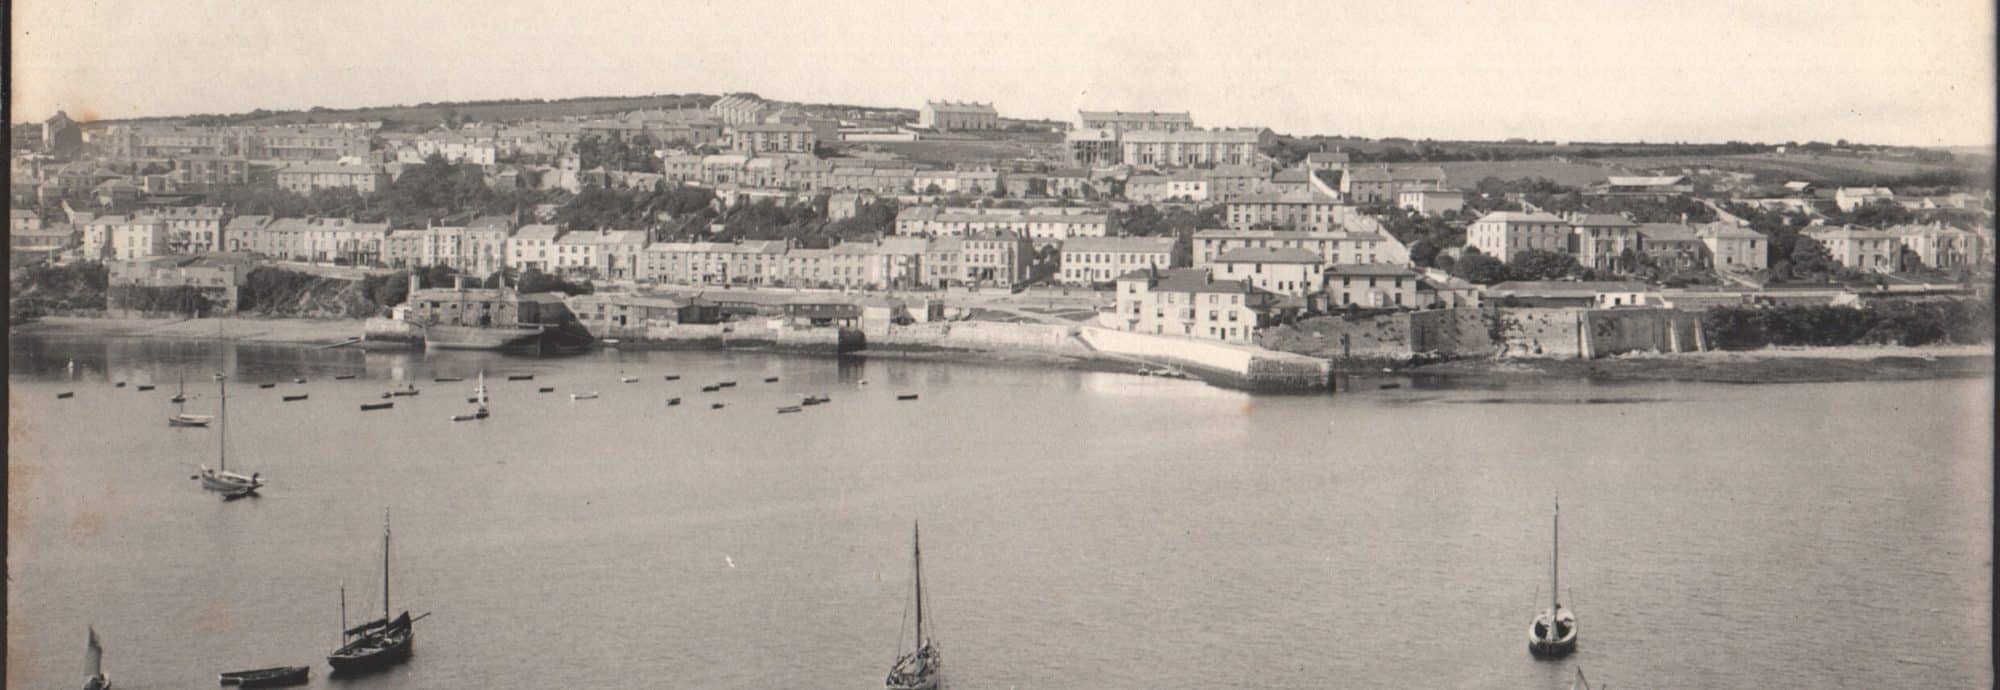 A black and white photograph of Falmouth town.